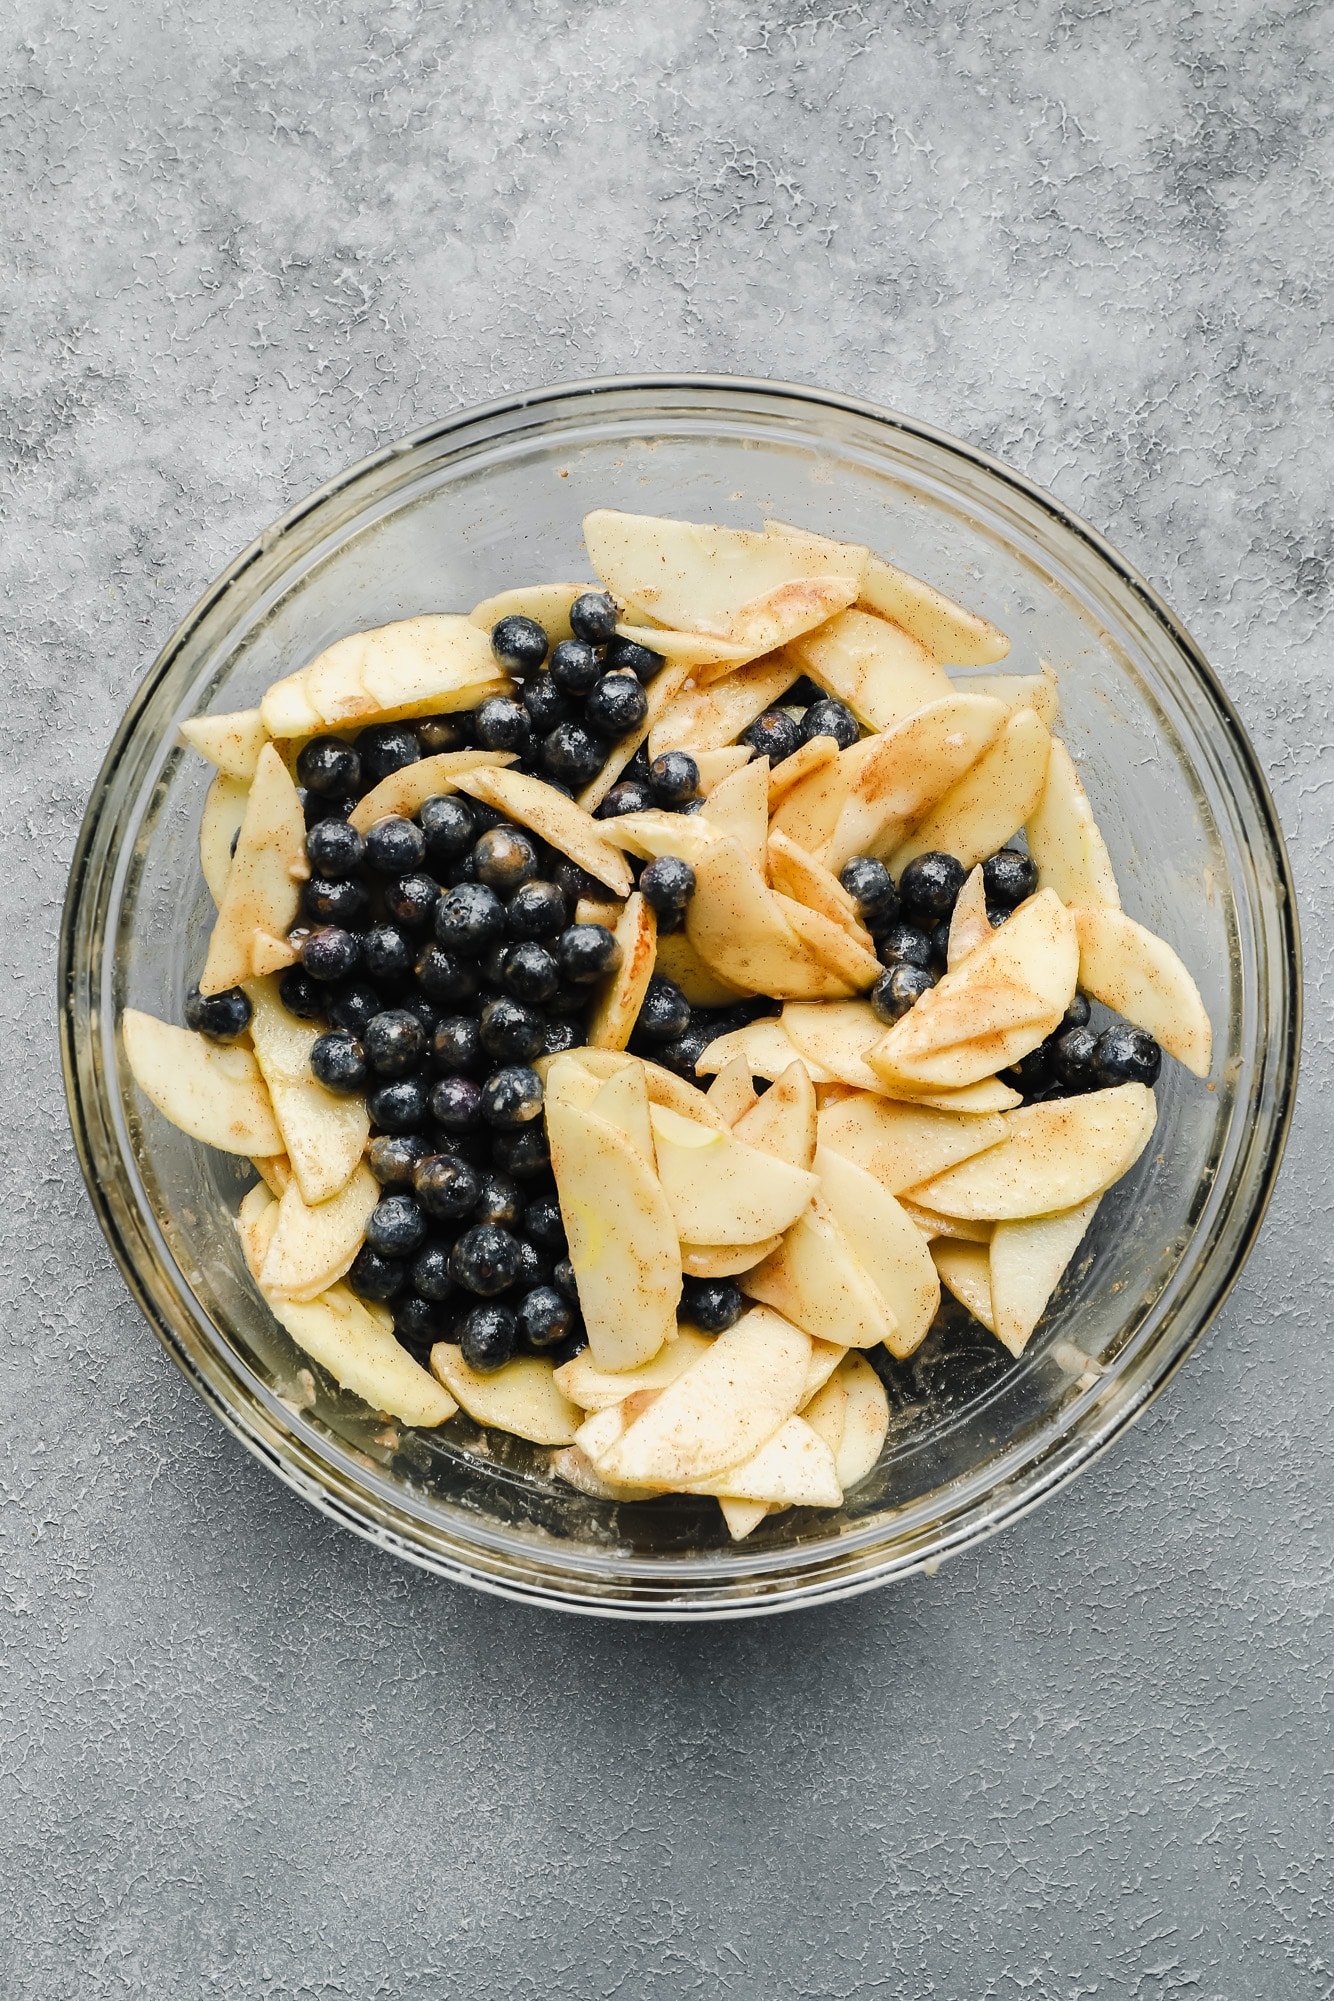 blueberries and slices apples in a glass bowl.